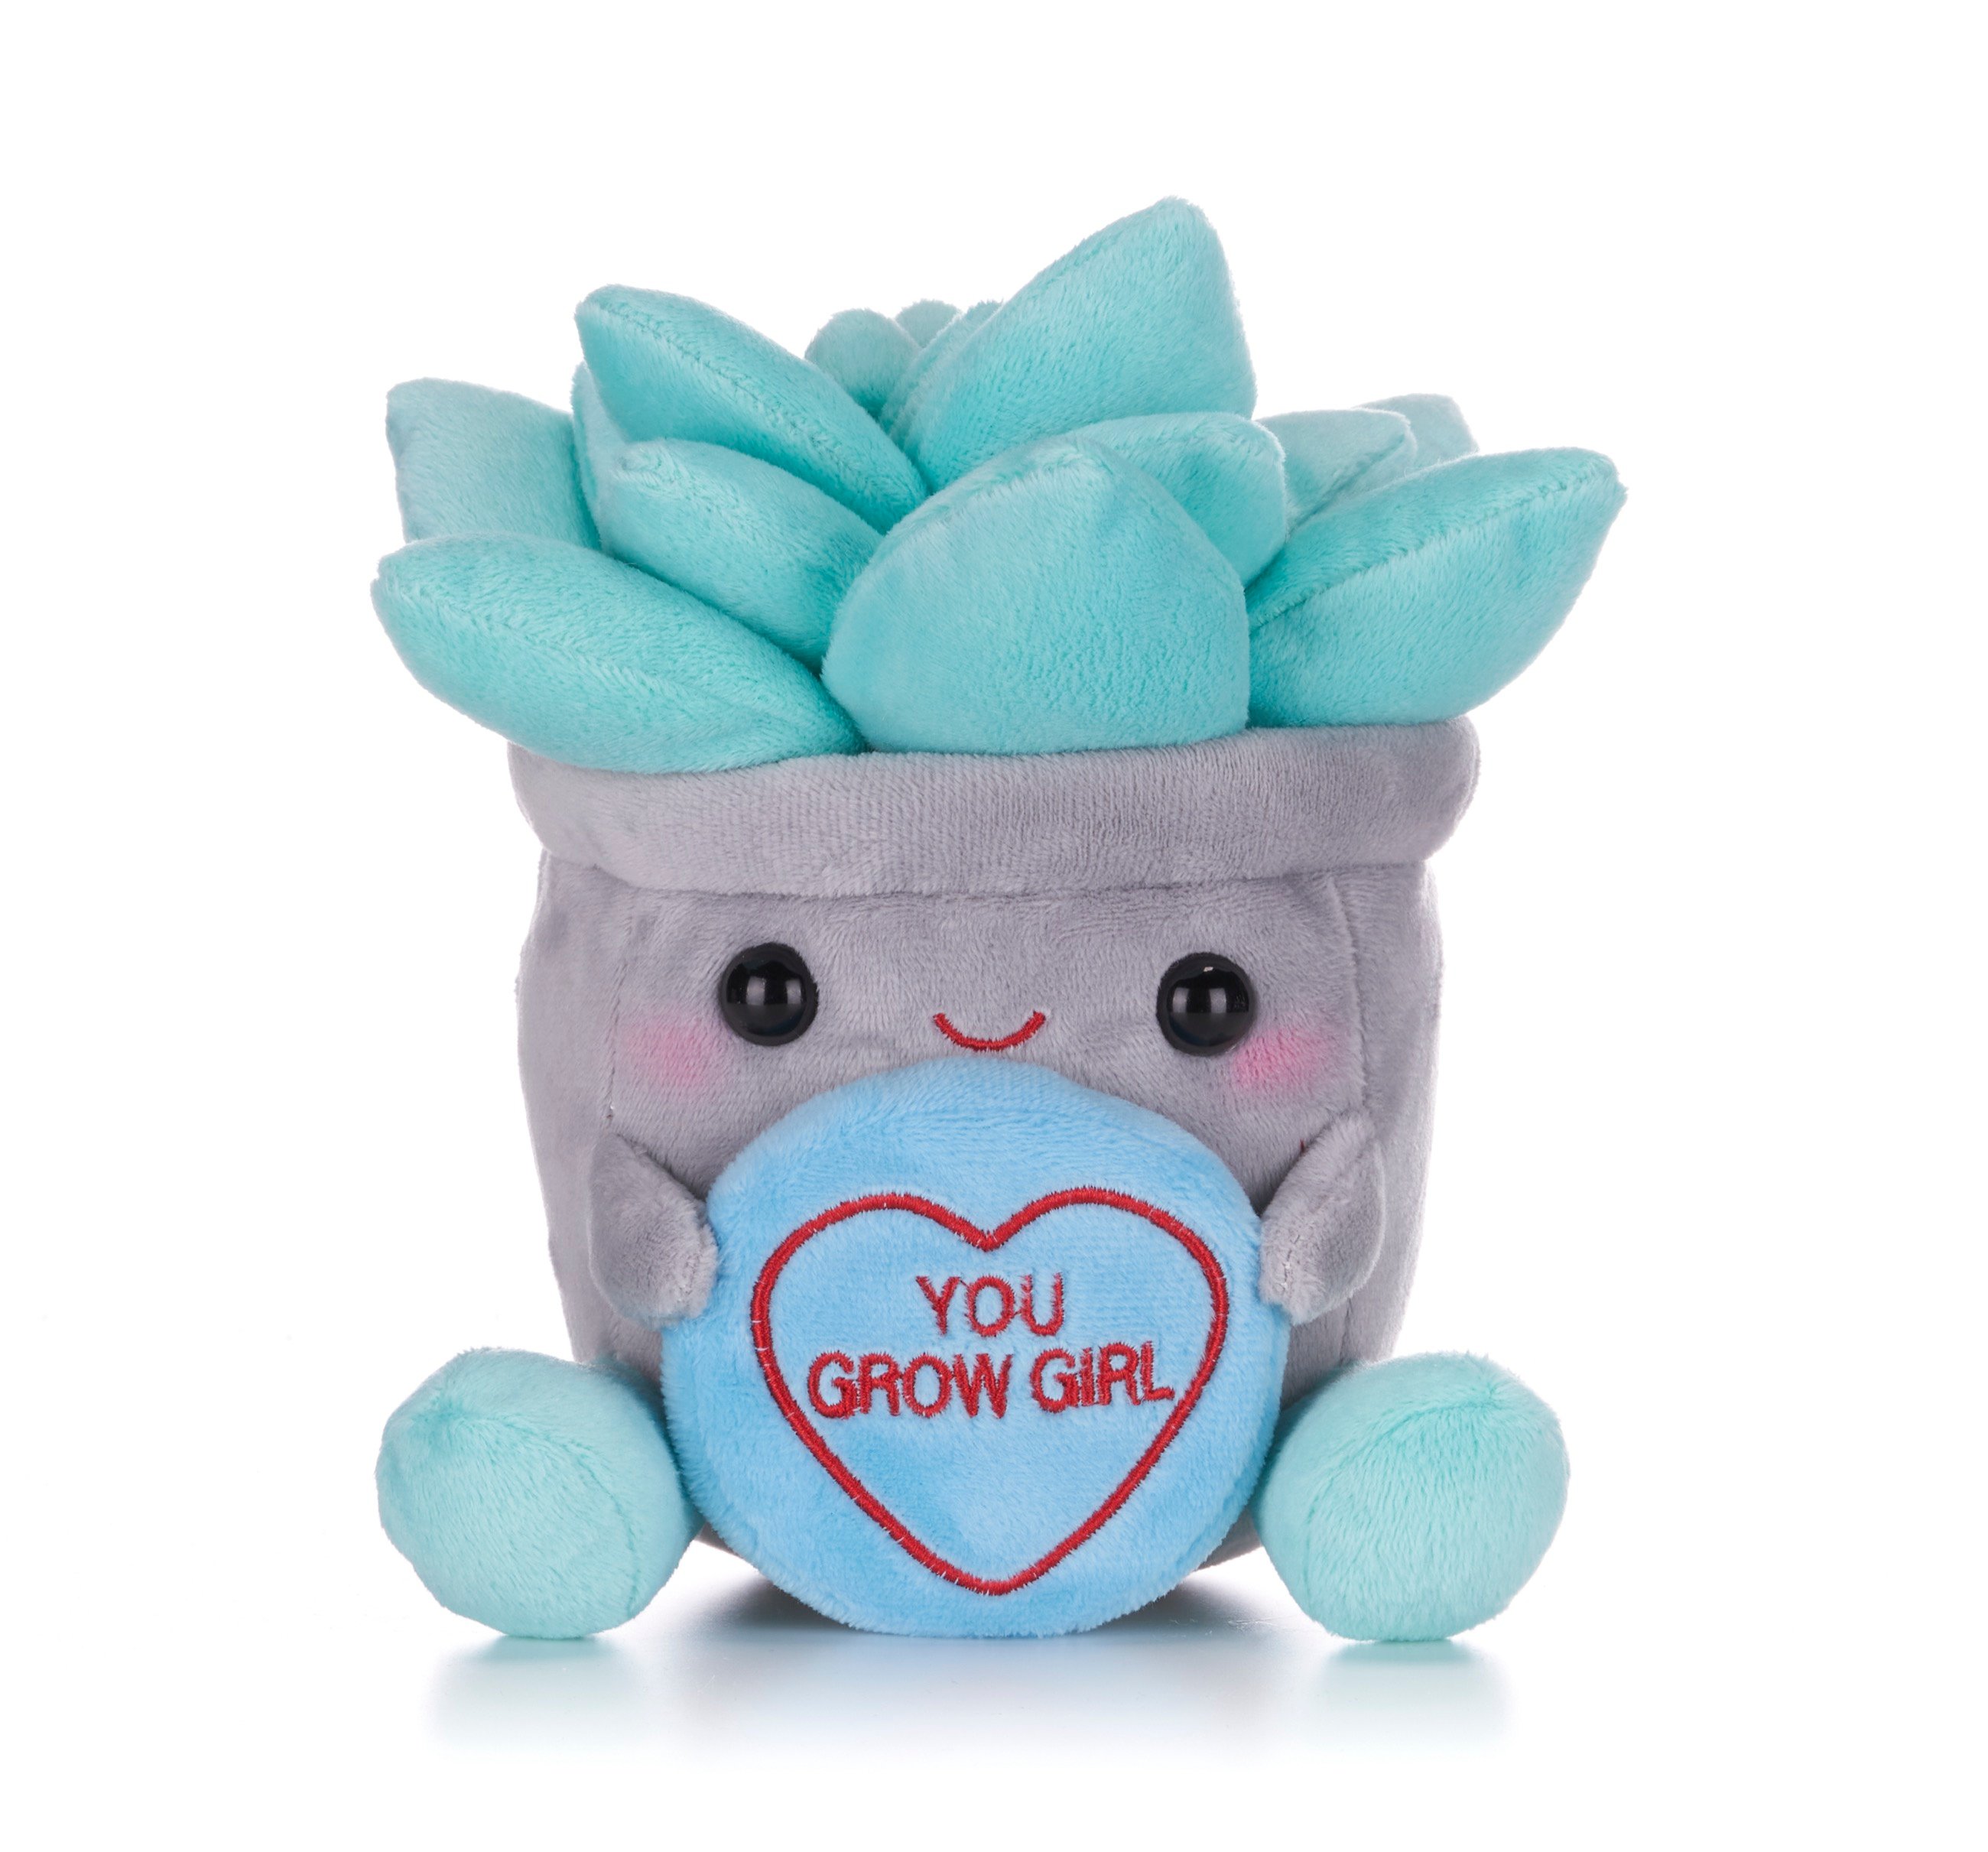 Swizzels Love Hearts You Grow Girl Plush Soft Toy